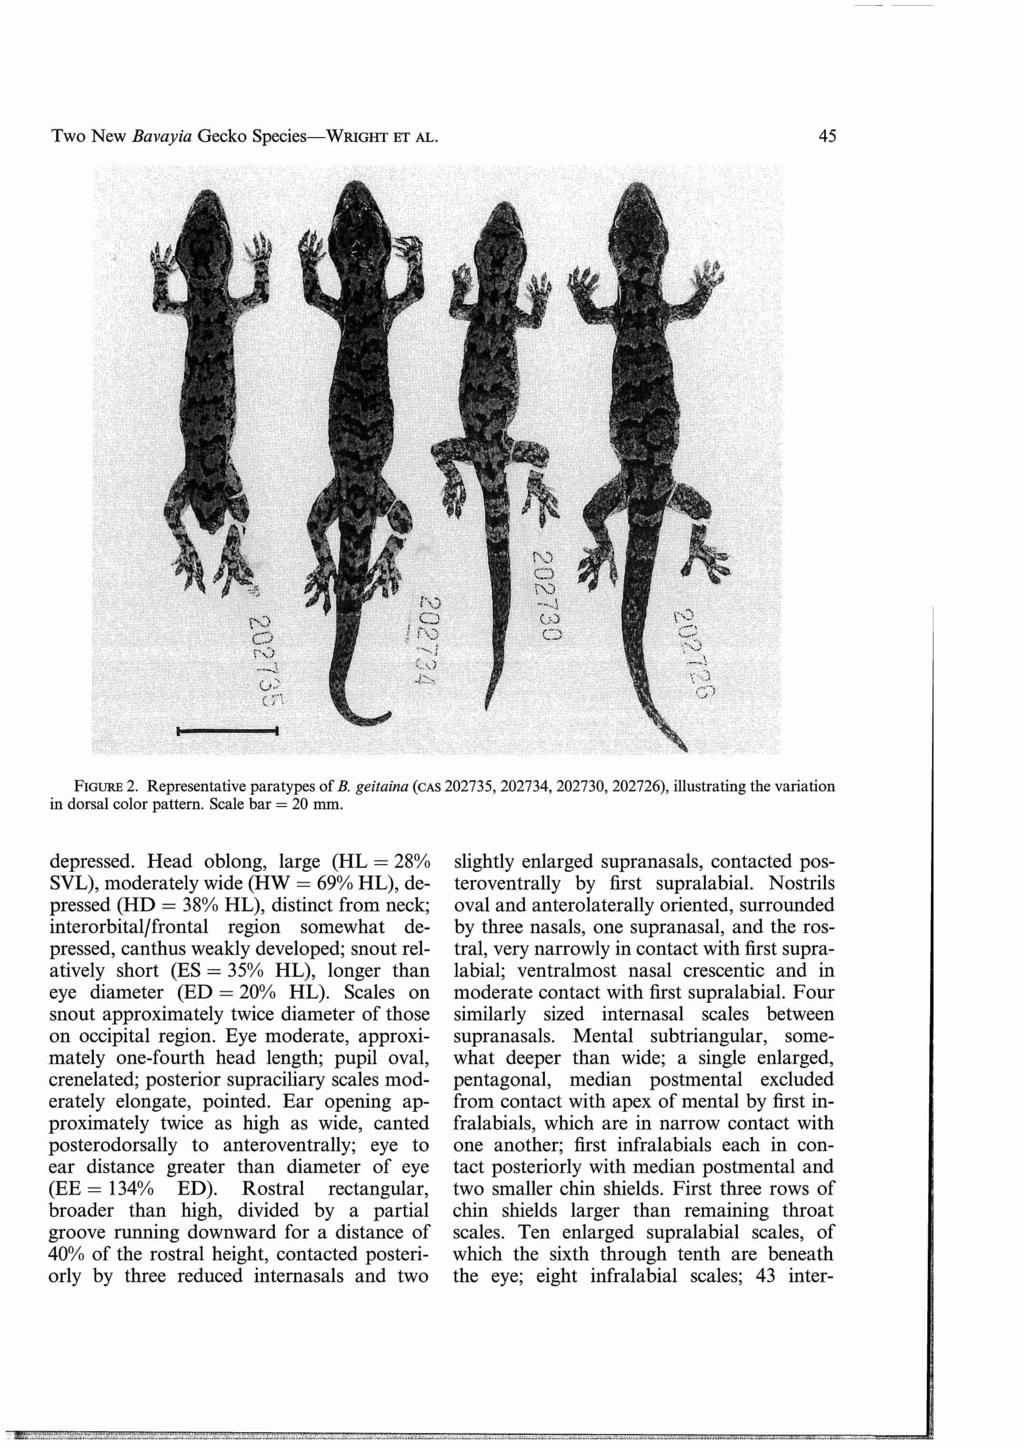 Two New Bavayia Gecko Species-WRIGHT ET AL. 45 FIGURE 2. Representative paratypes of B. geitaina (CAS 202735, 202734, 202730, 202726), illustrating the variation in dorsal color pattern.